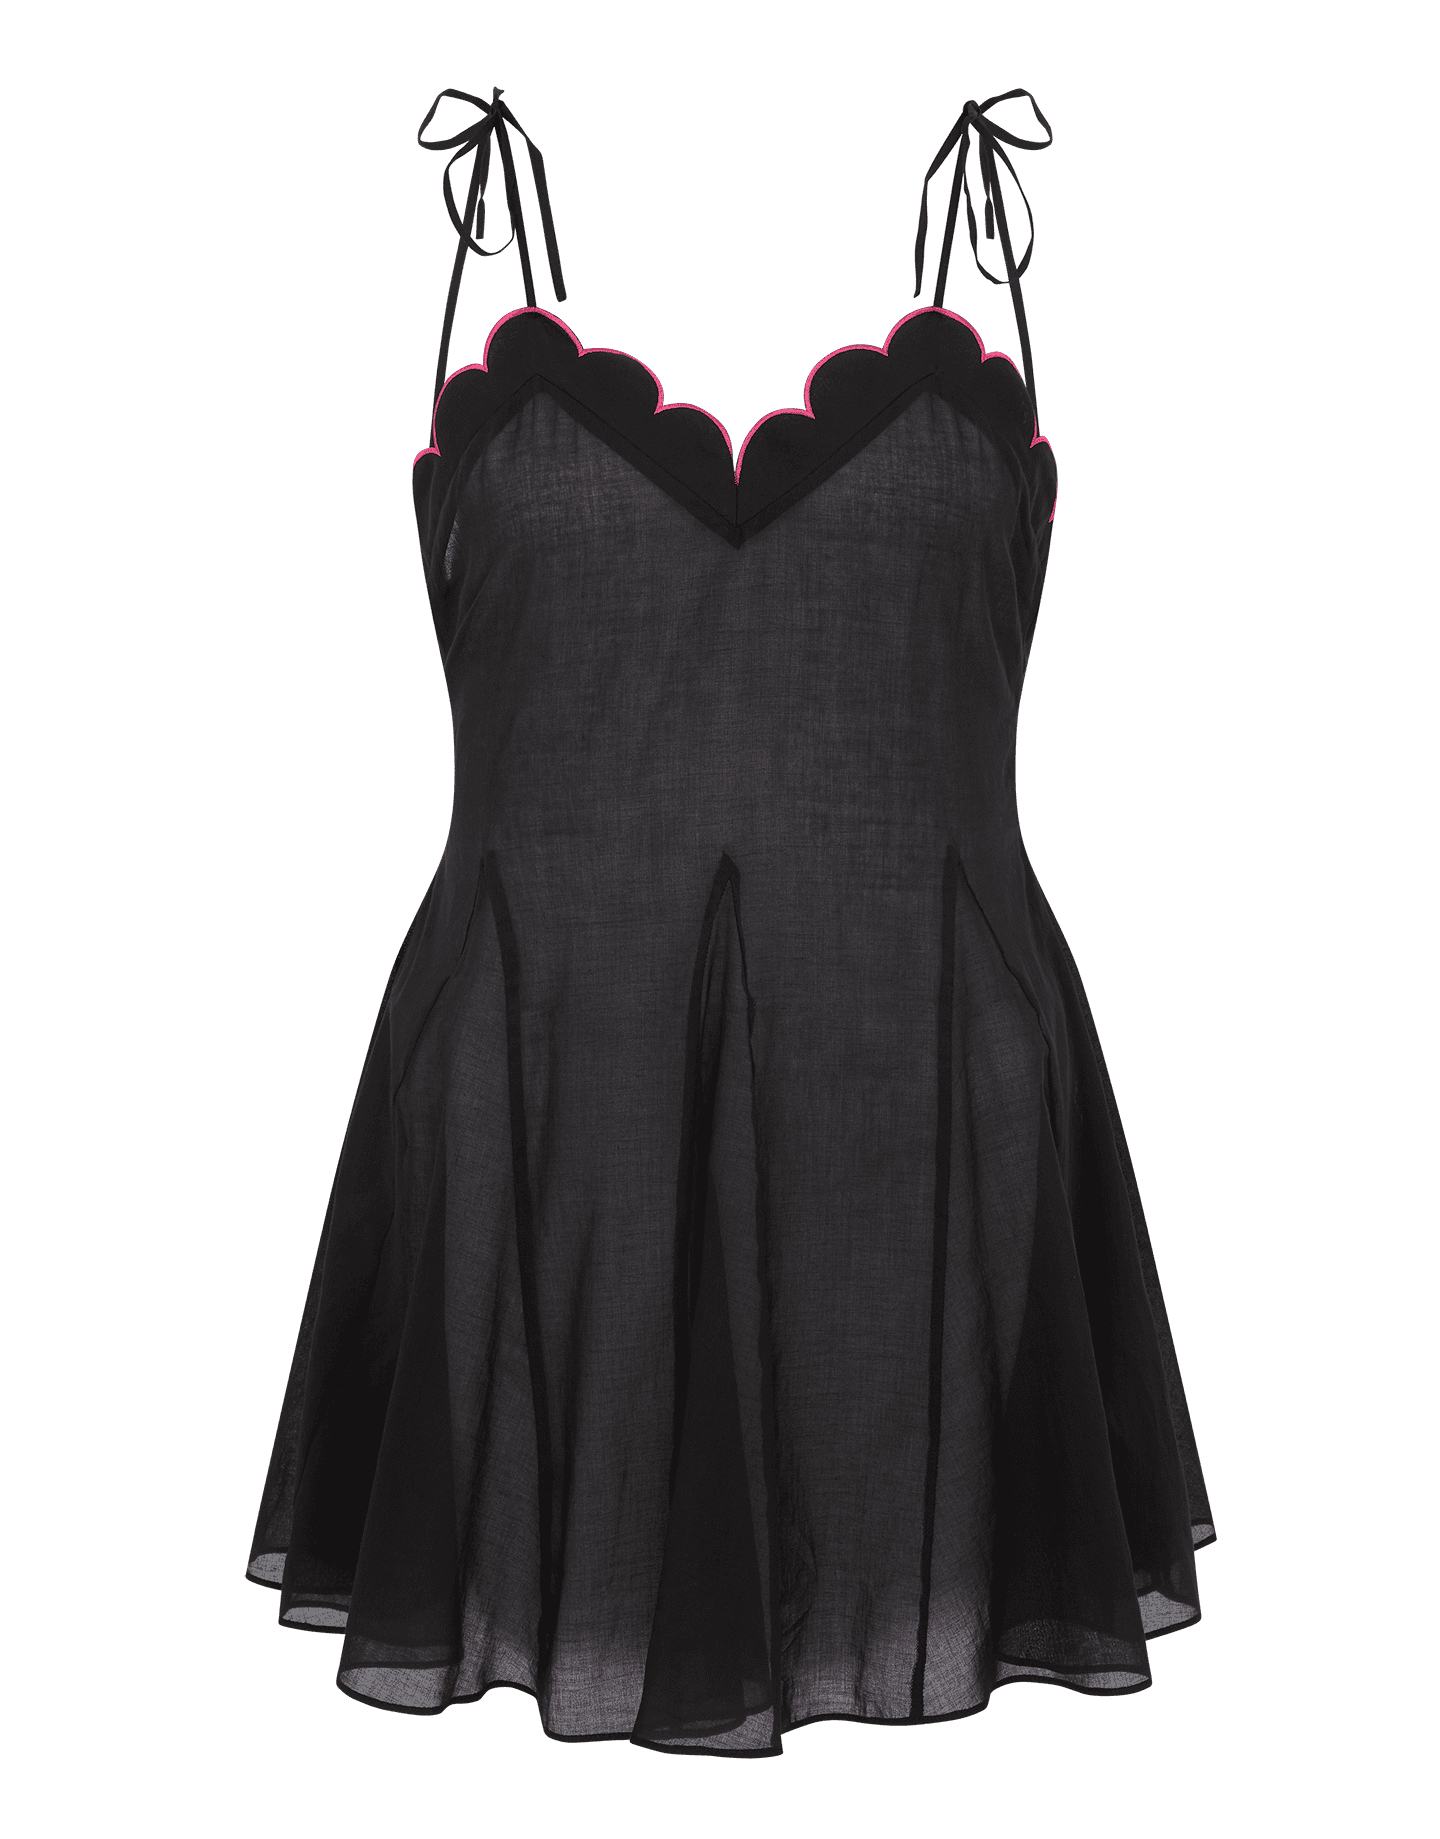 Lorna Dress in Black | By Agent Provocateur